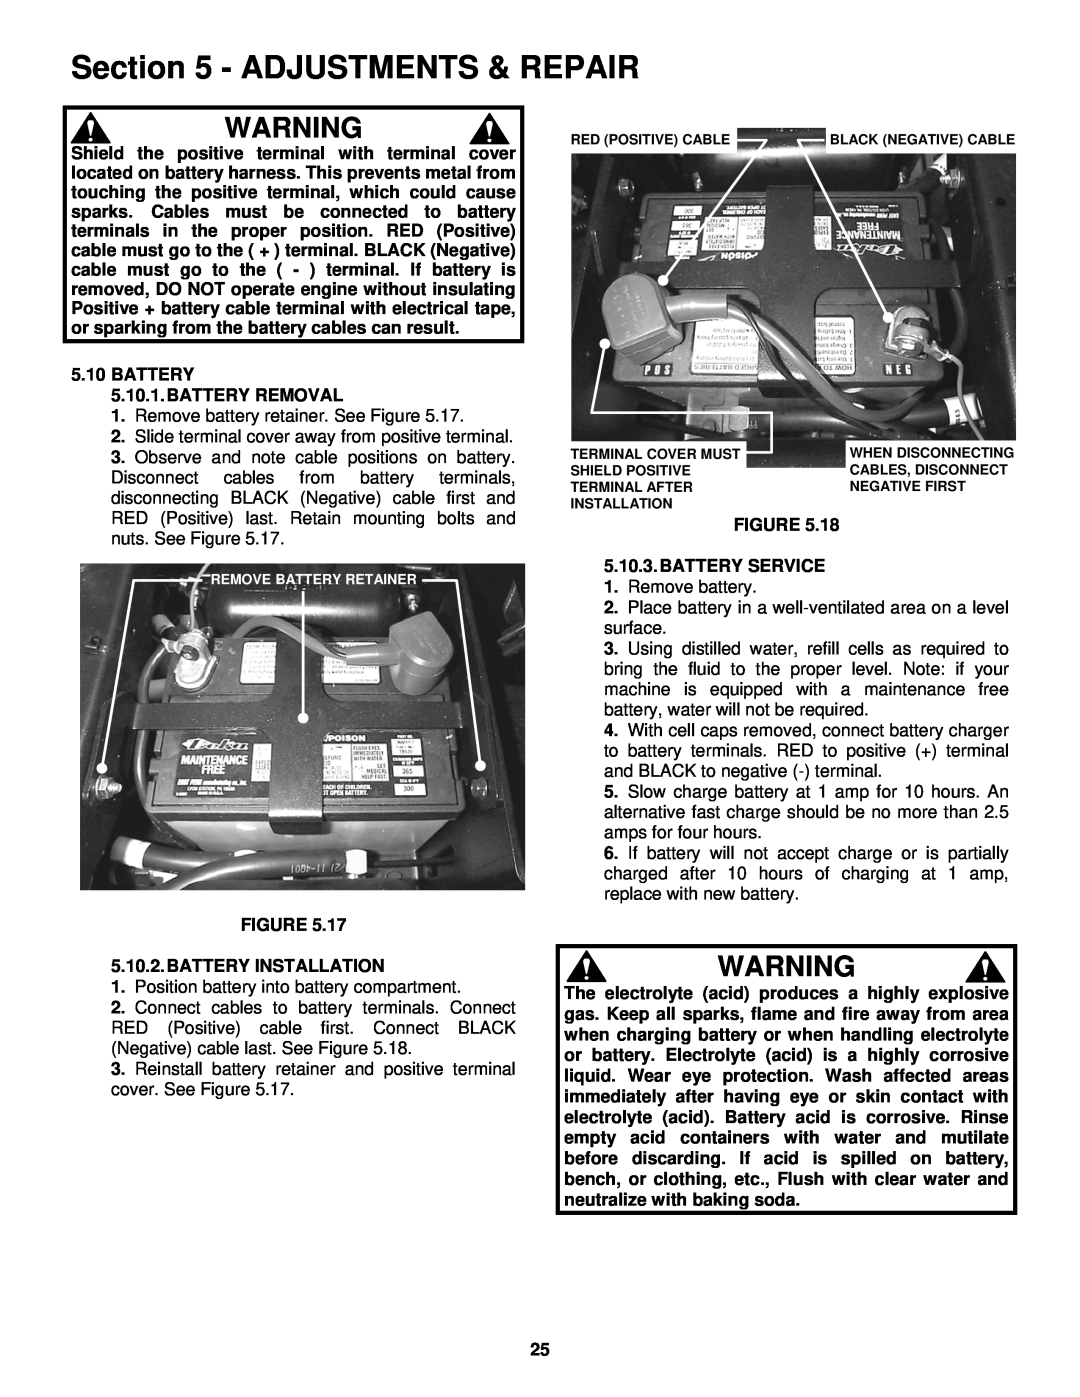 Snapper NZM19481KWV important safety instructions Adjustments & Repair, BATTERY 5.10.1.BATTERY REMOVAL 